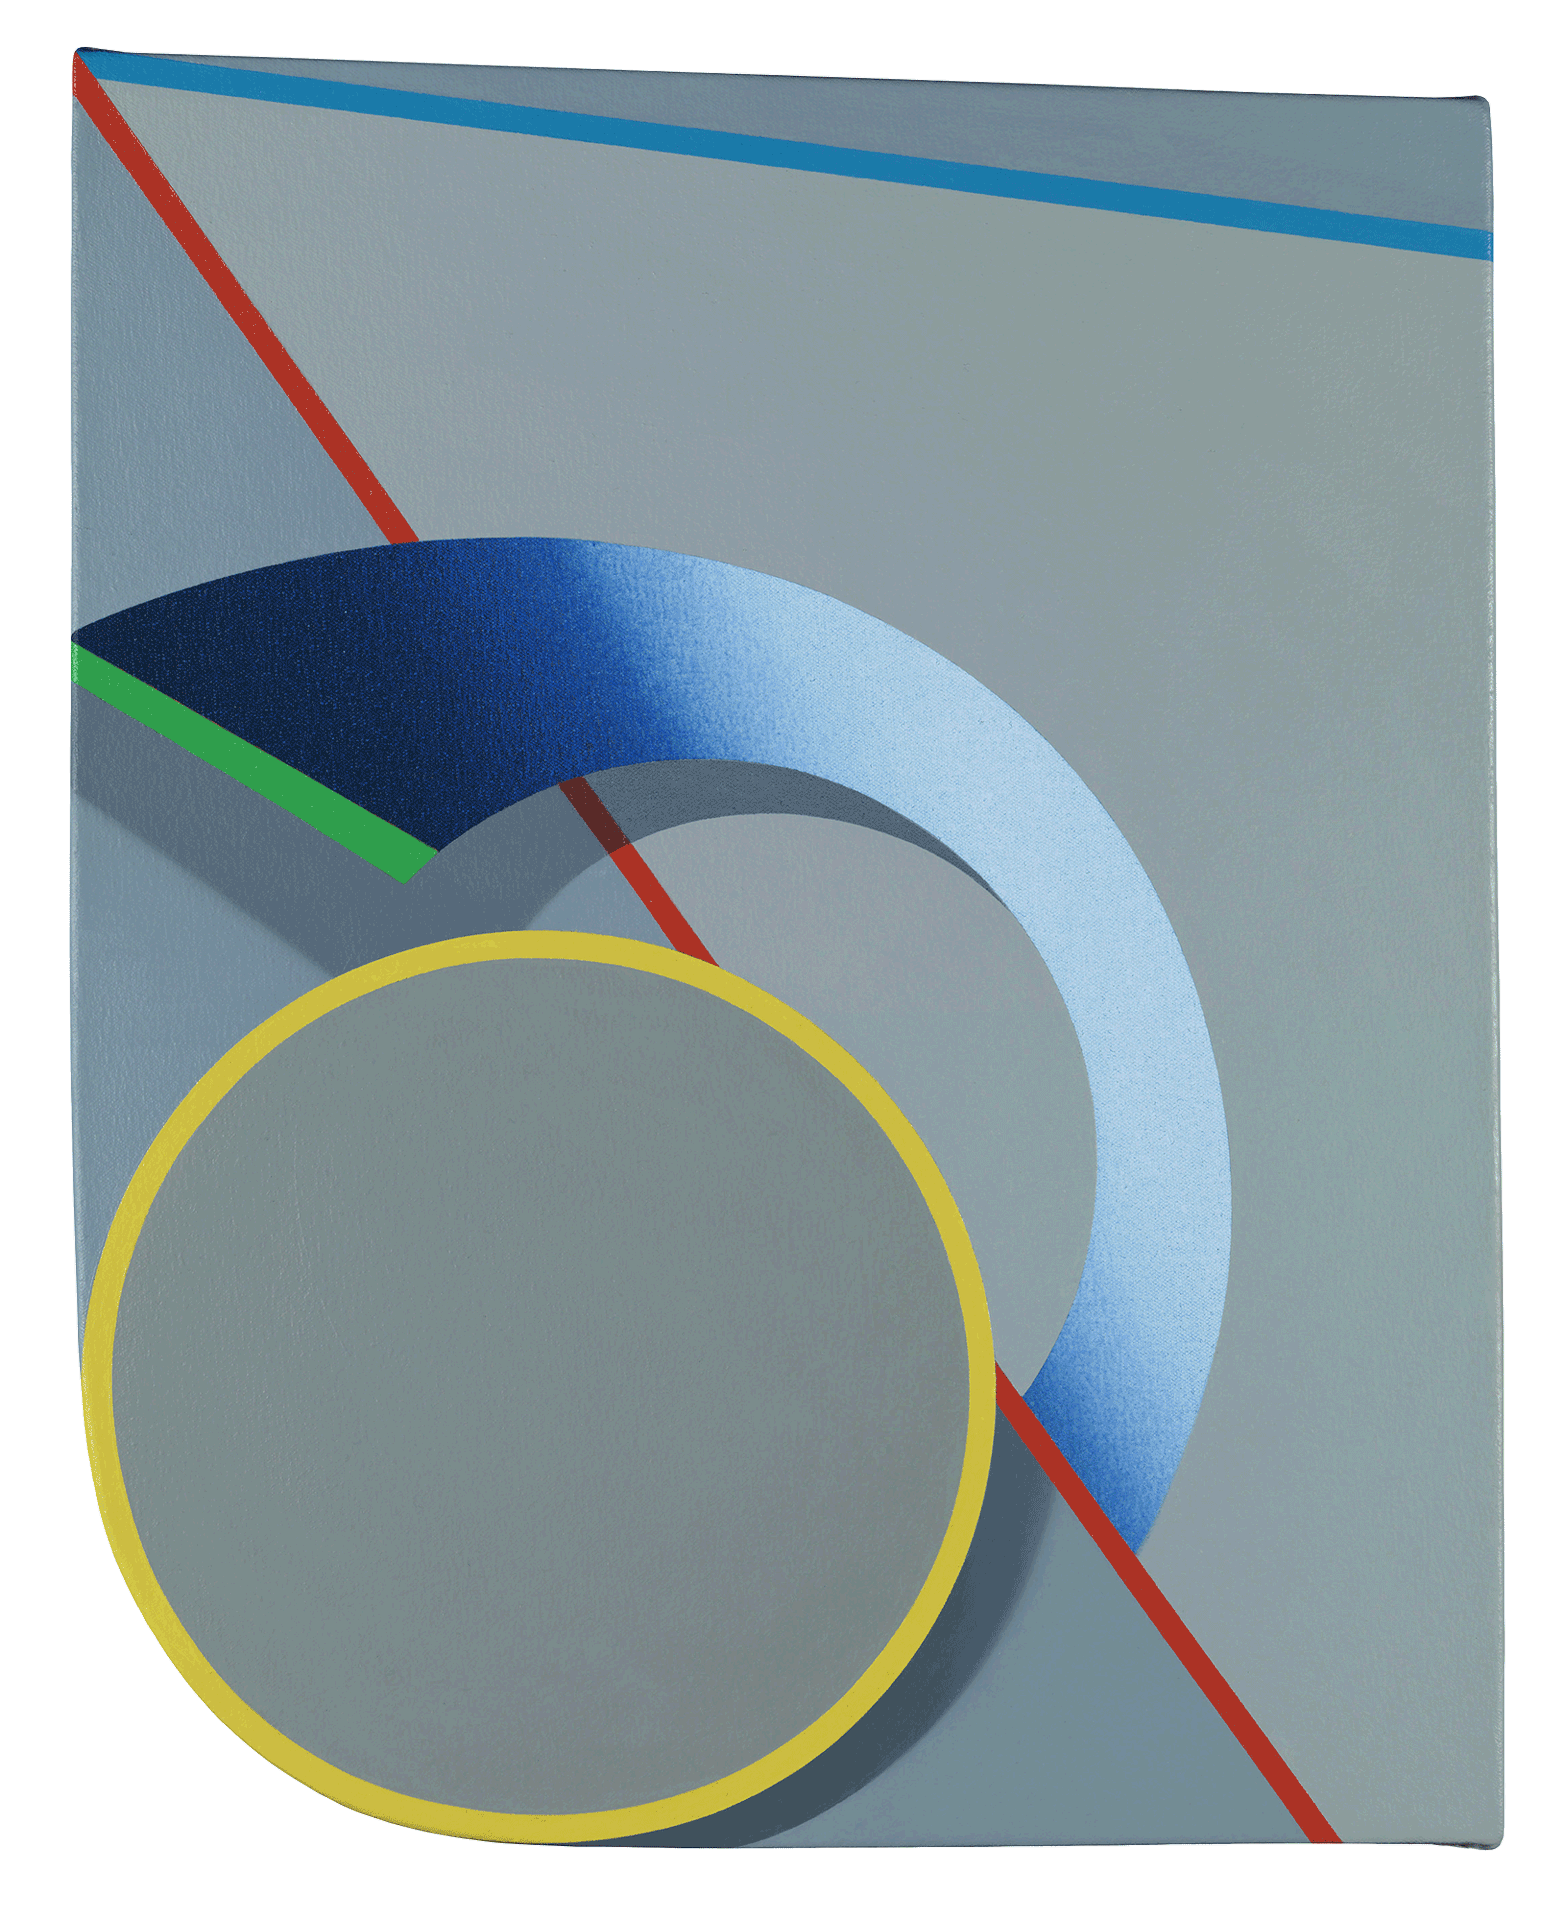 A painting by Tomma Abts, titled Oeje, dated 2016.